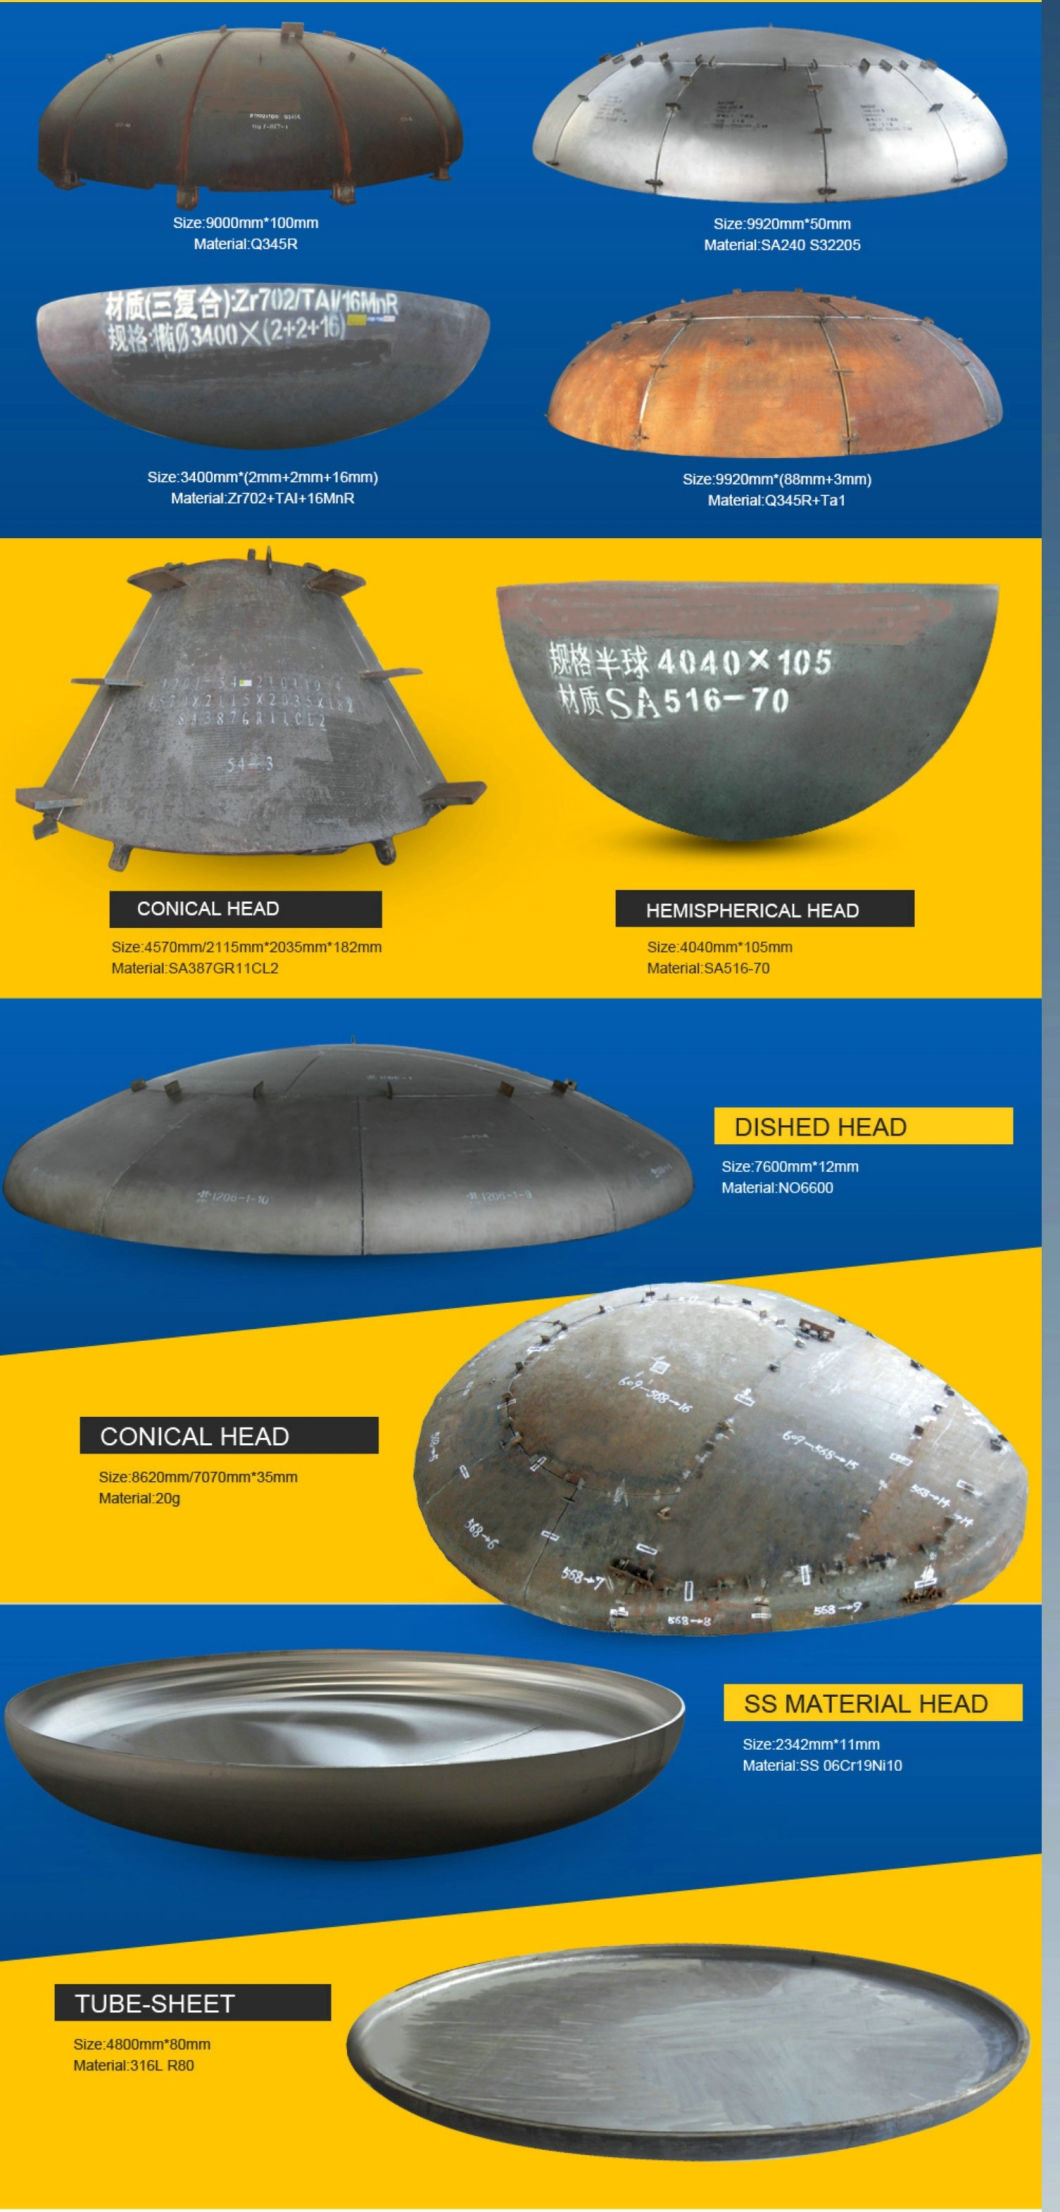 Hemispherical Head (Dish Head Cap) Made by Segment and Petals Forming for Oil&Gas Industry Pressure Vessel etc.